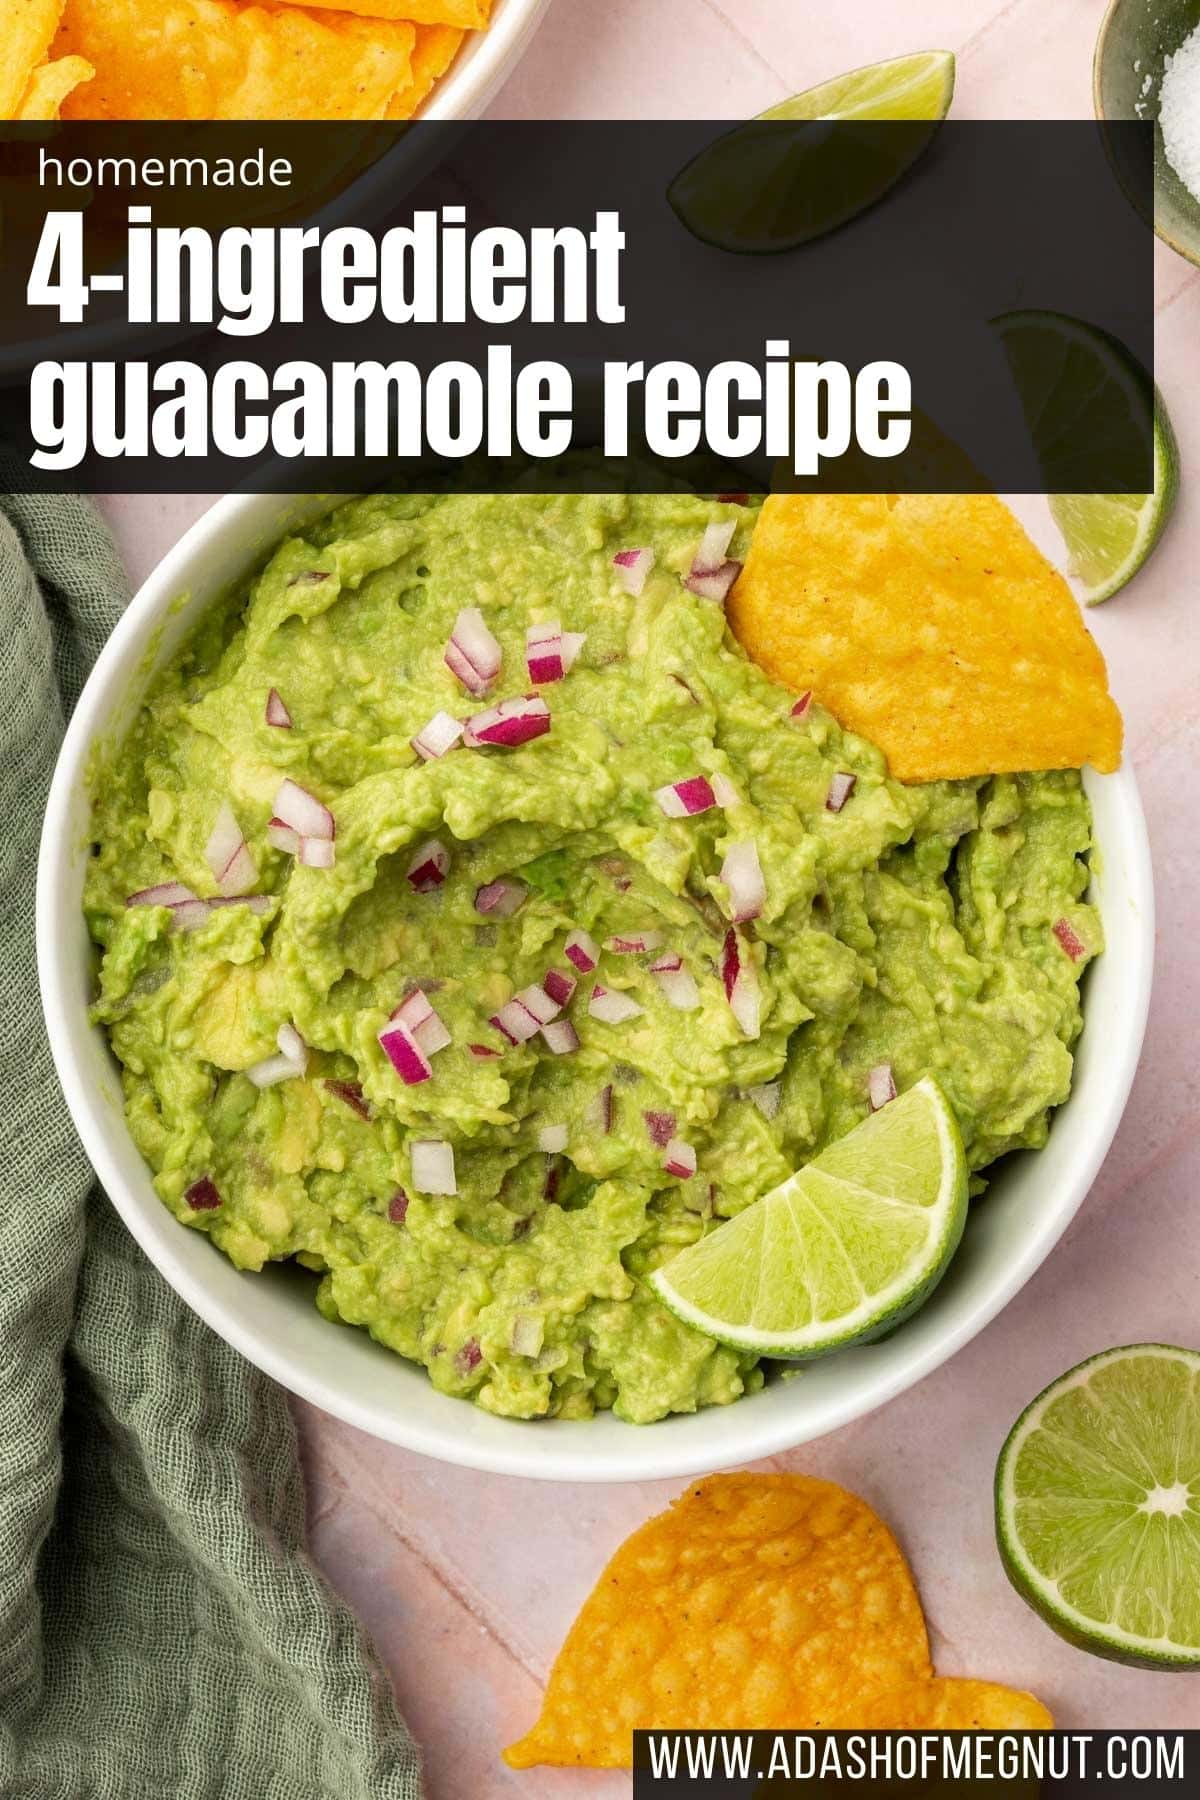 A bowl of 4-ingredient guacamole topped with finely diced red onion, tortilla chip and a lime wedge.